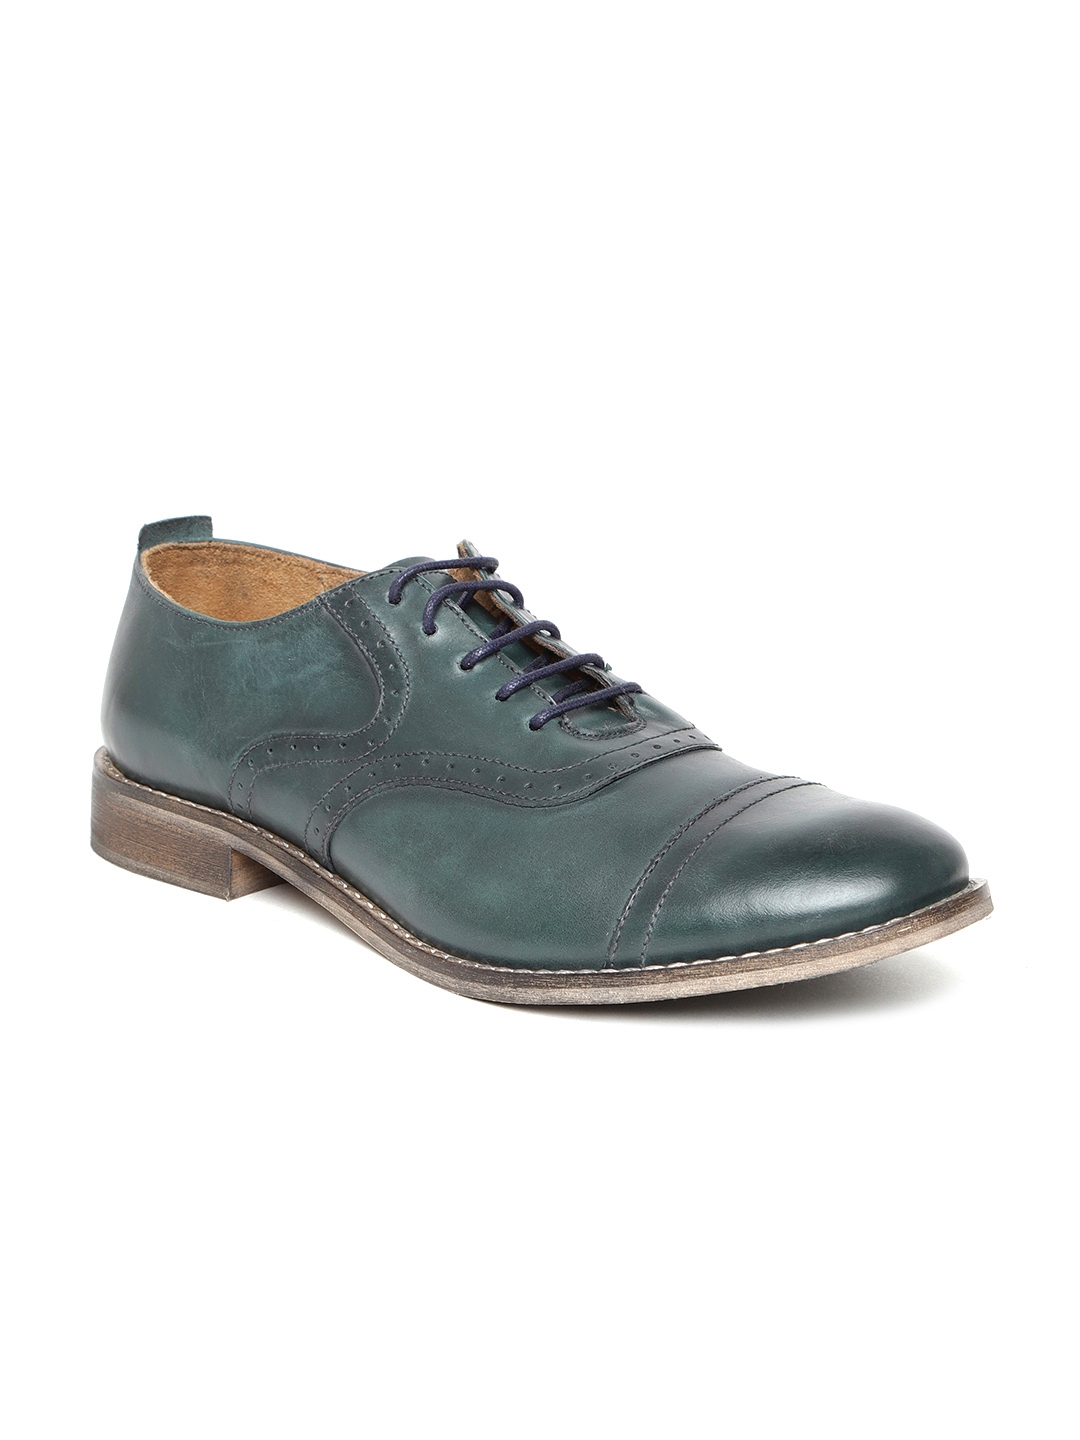 Buy Levis Men Green Leather Brogues - Casual Shoes for Men 2466464 | Myntra